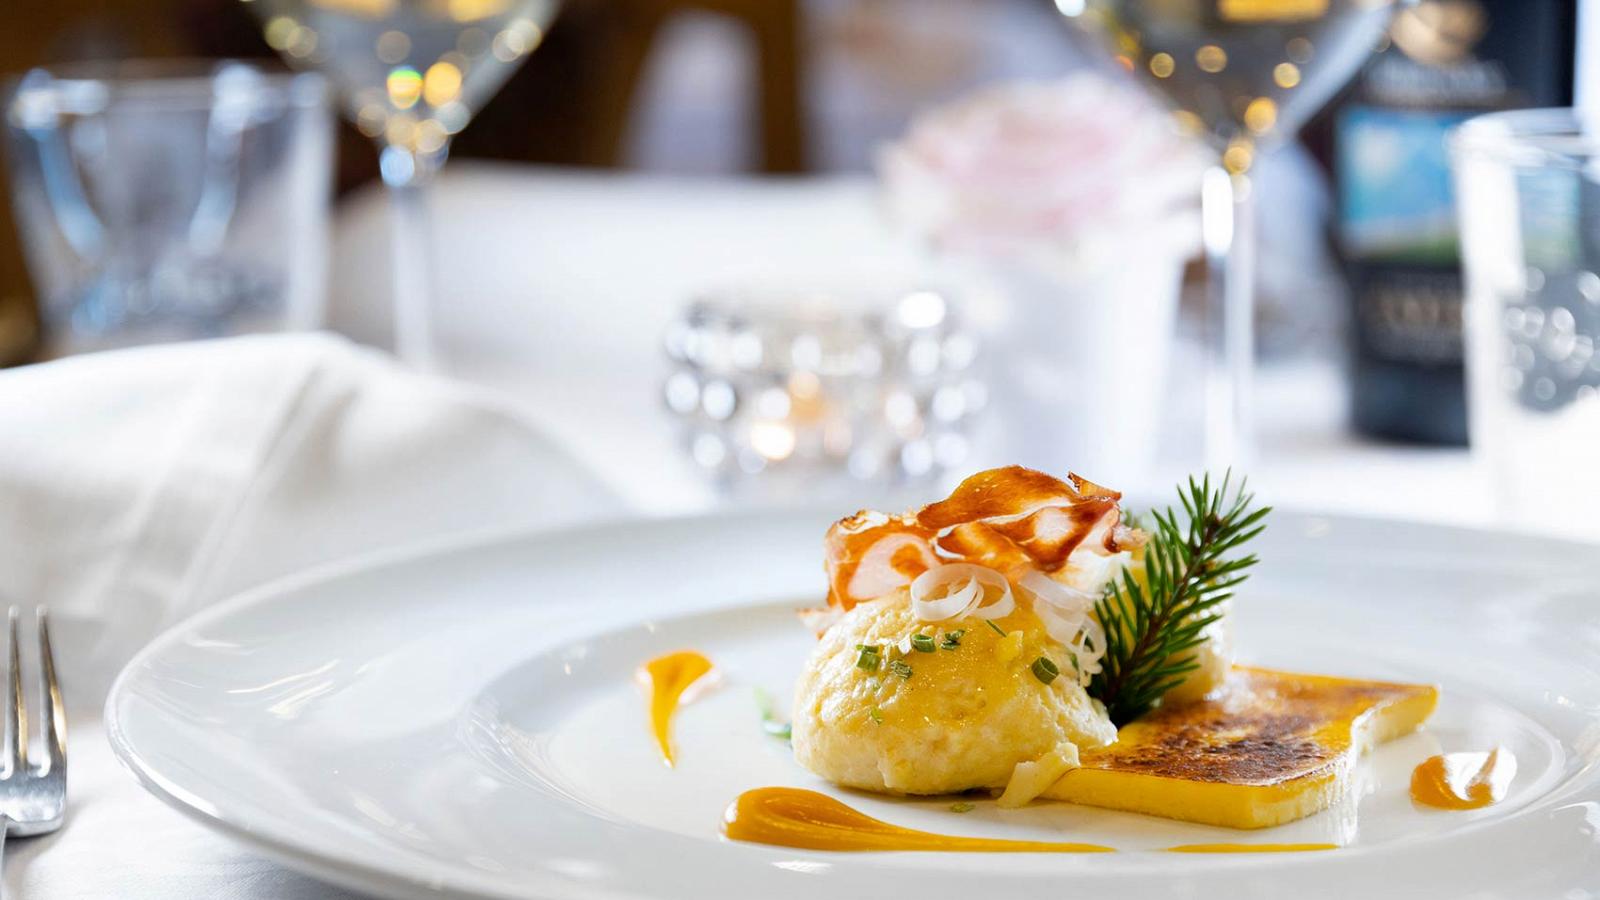 Detail of a dish of the refined cuisine of the Hotel La Serenella